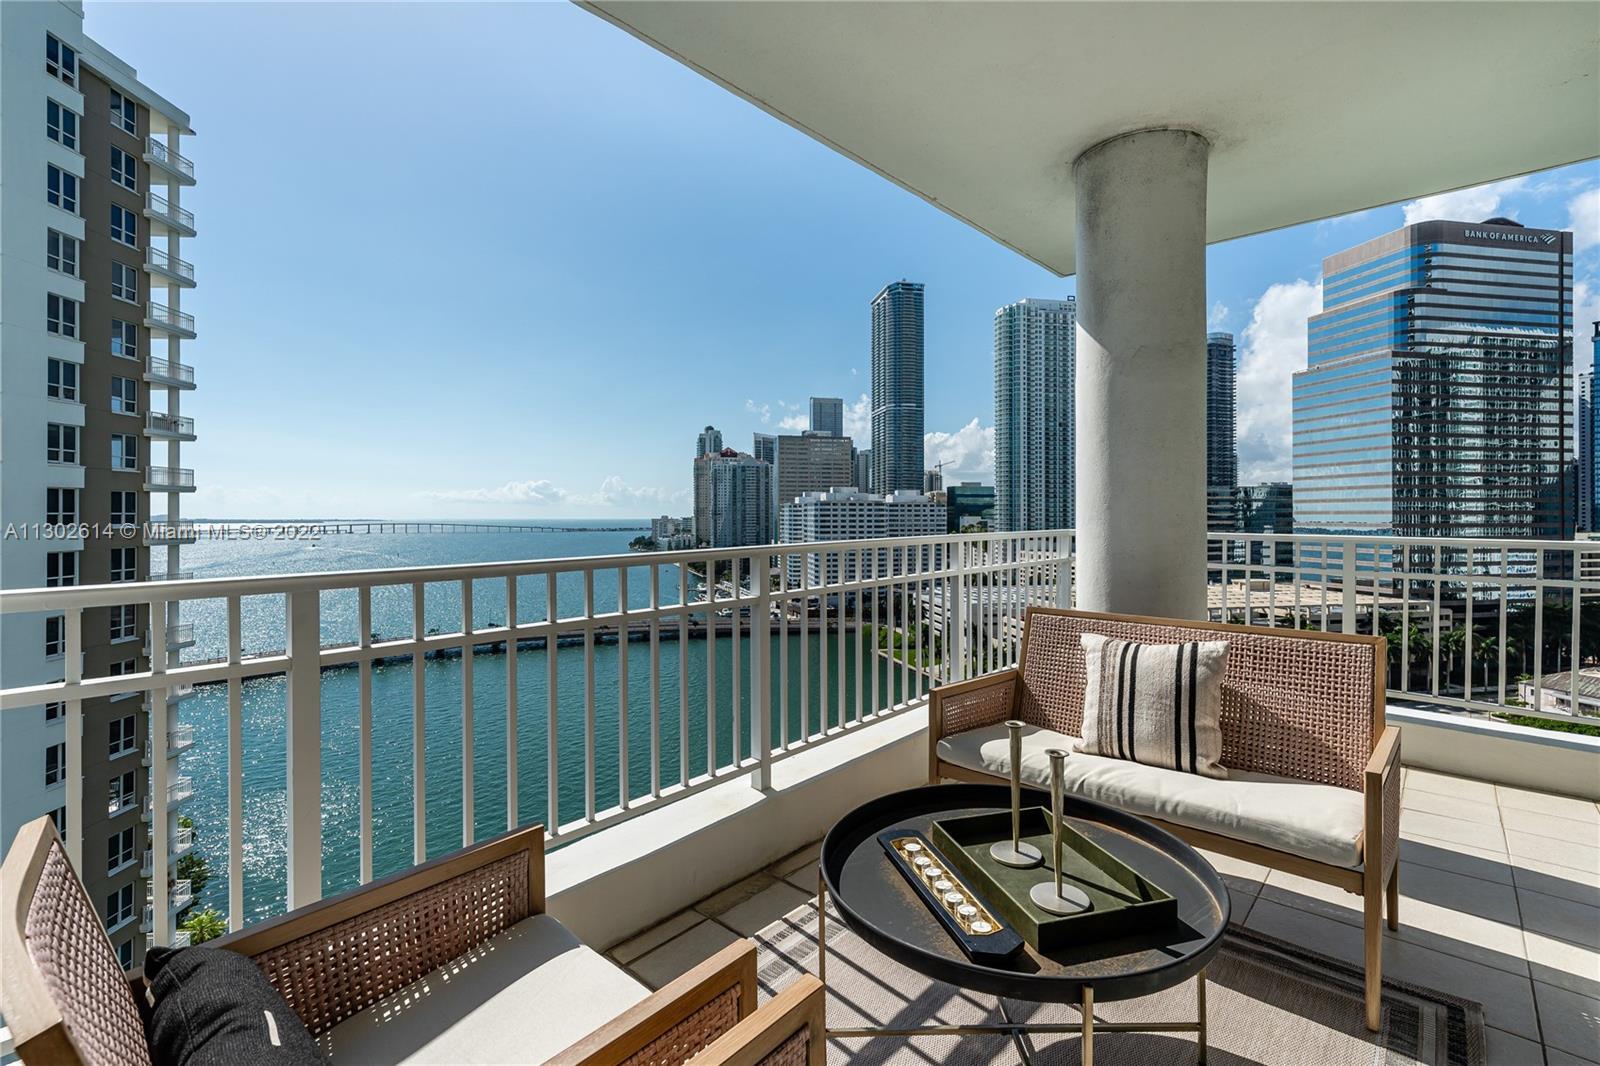 Spectacular corner unit with beautiful views of the bay, river, and Miami Skyline. Designer furnishe